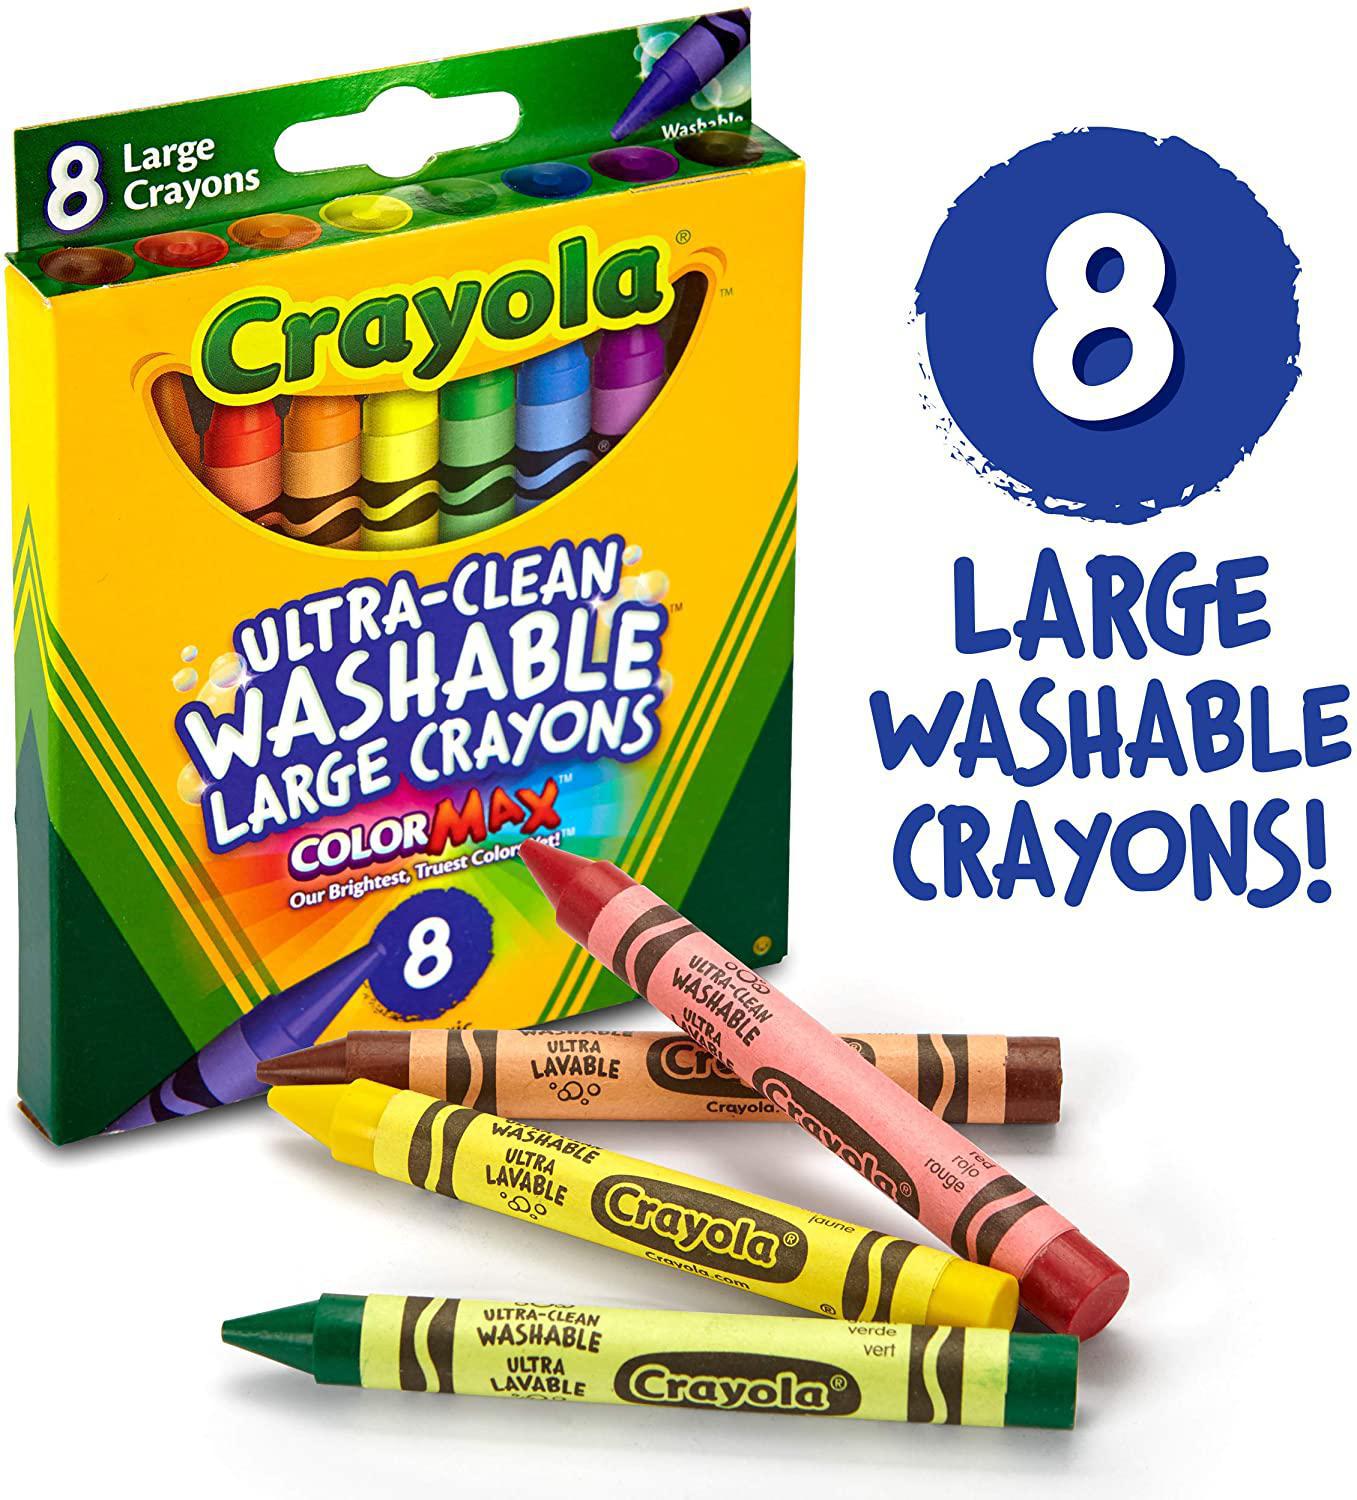 (4 pack) Crayola Classic Crayons, Back to School Supplies for Kids, 8 Ct,  Art Supplies